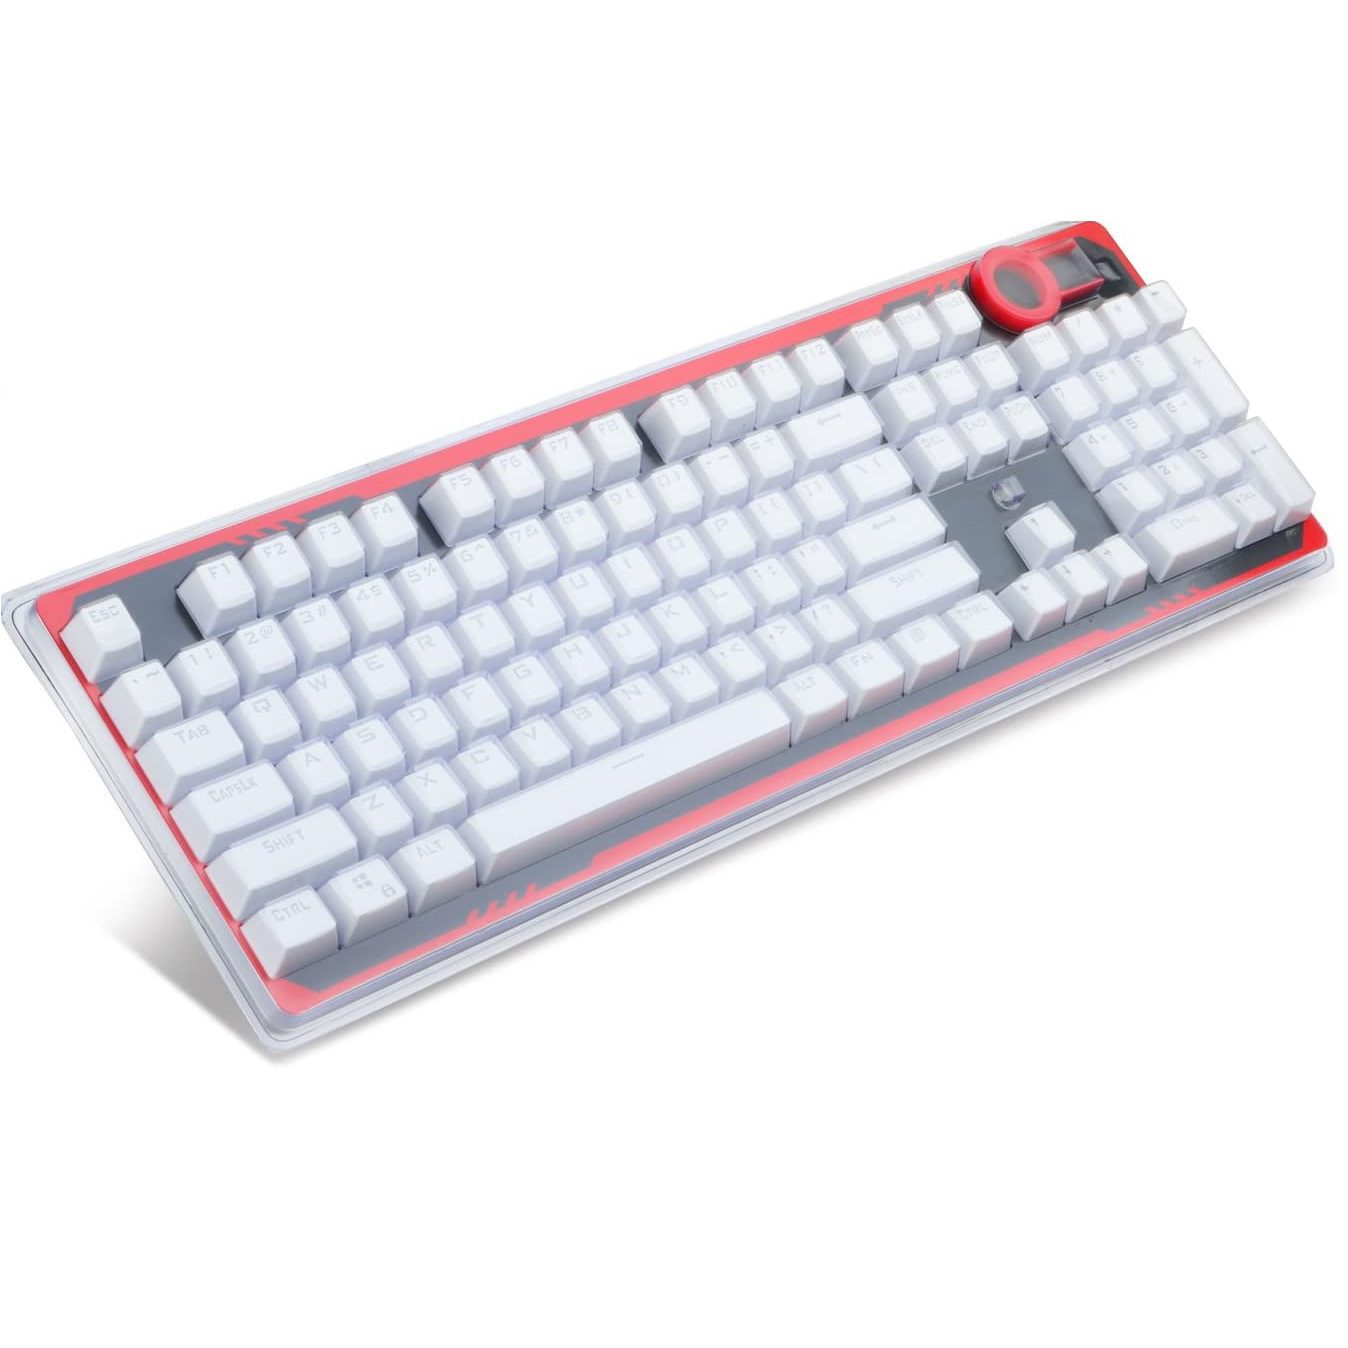 REDRAGON A101 Keycaps – 104 Replacement EN Keycaps | White